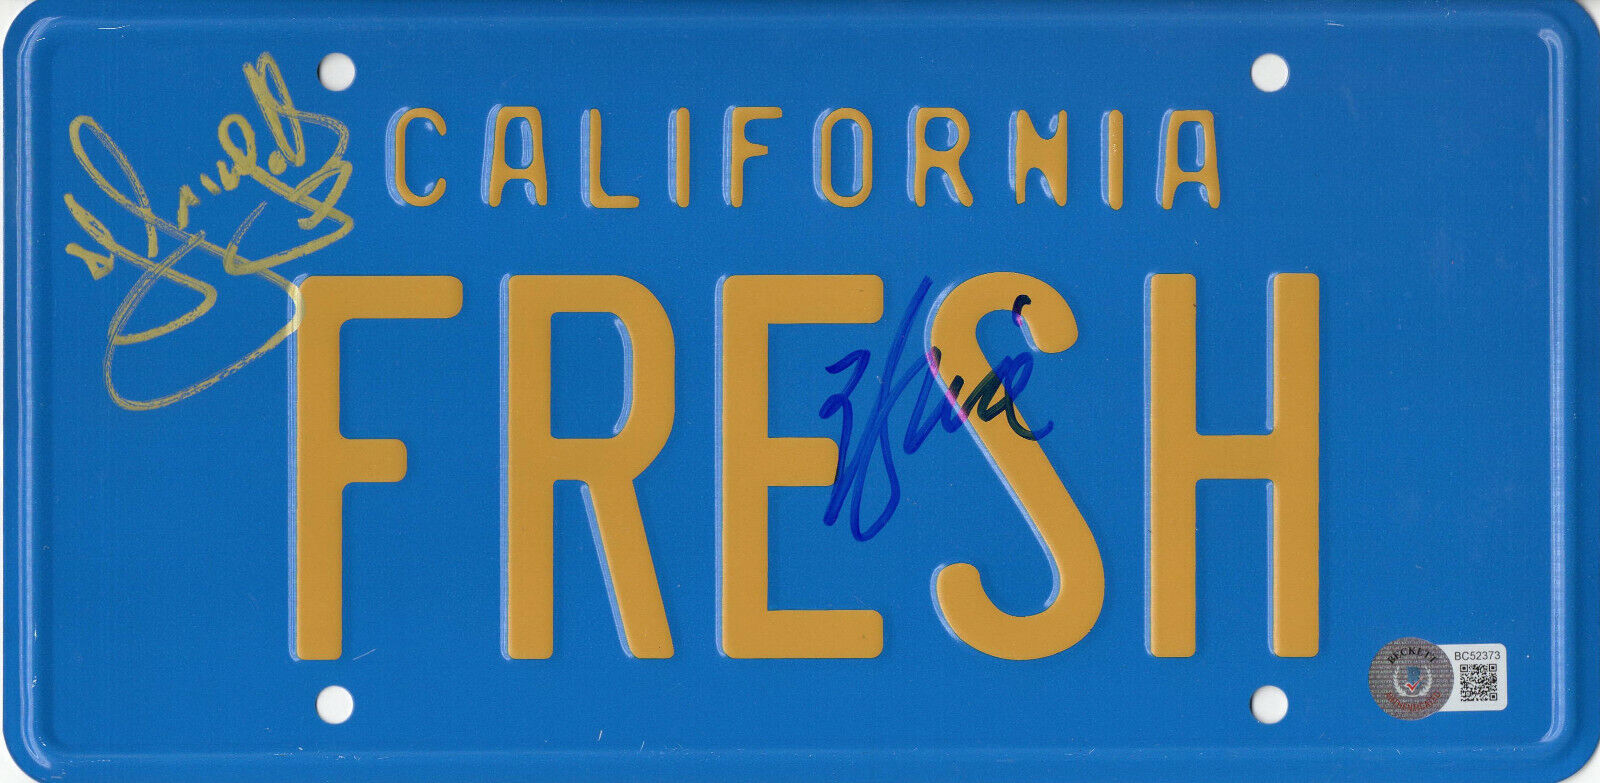 WILL SMITH DJ JAZZY JEFF SIGNED AUTO FRESH PRINCE OF BEL AIR LICENSE PLATE BAS 